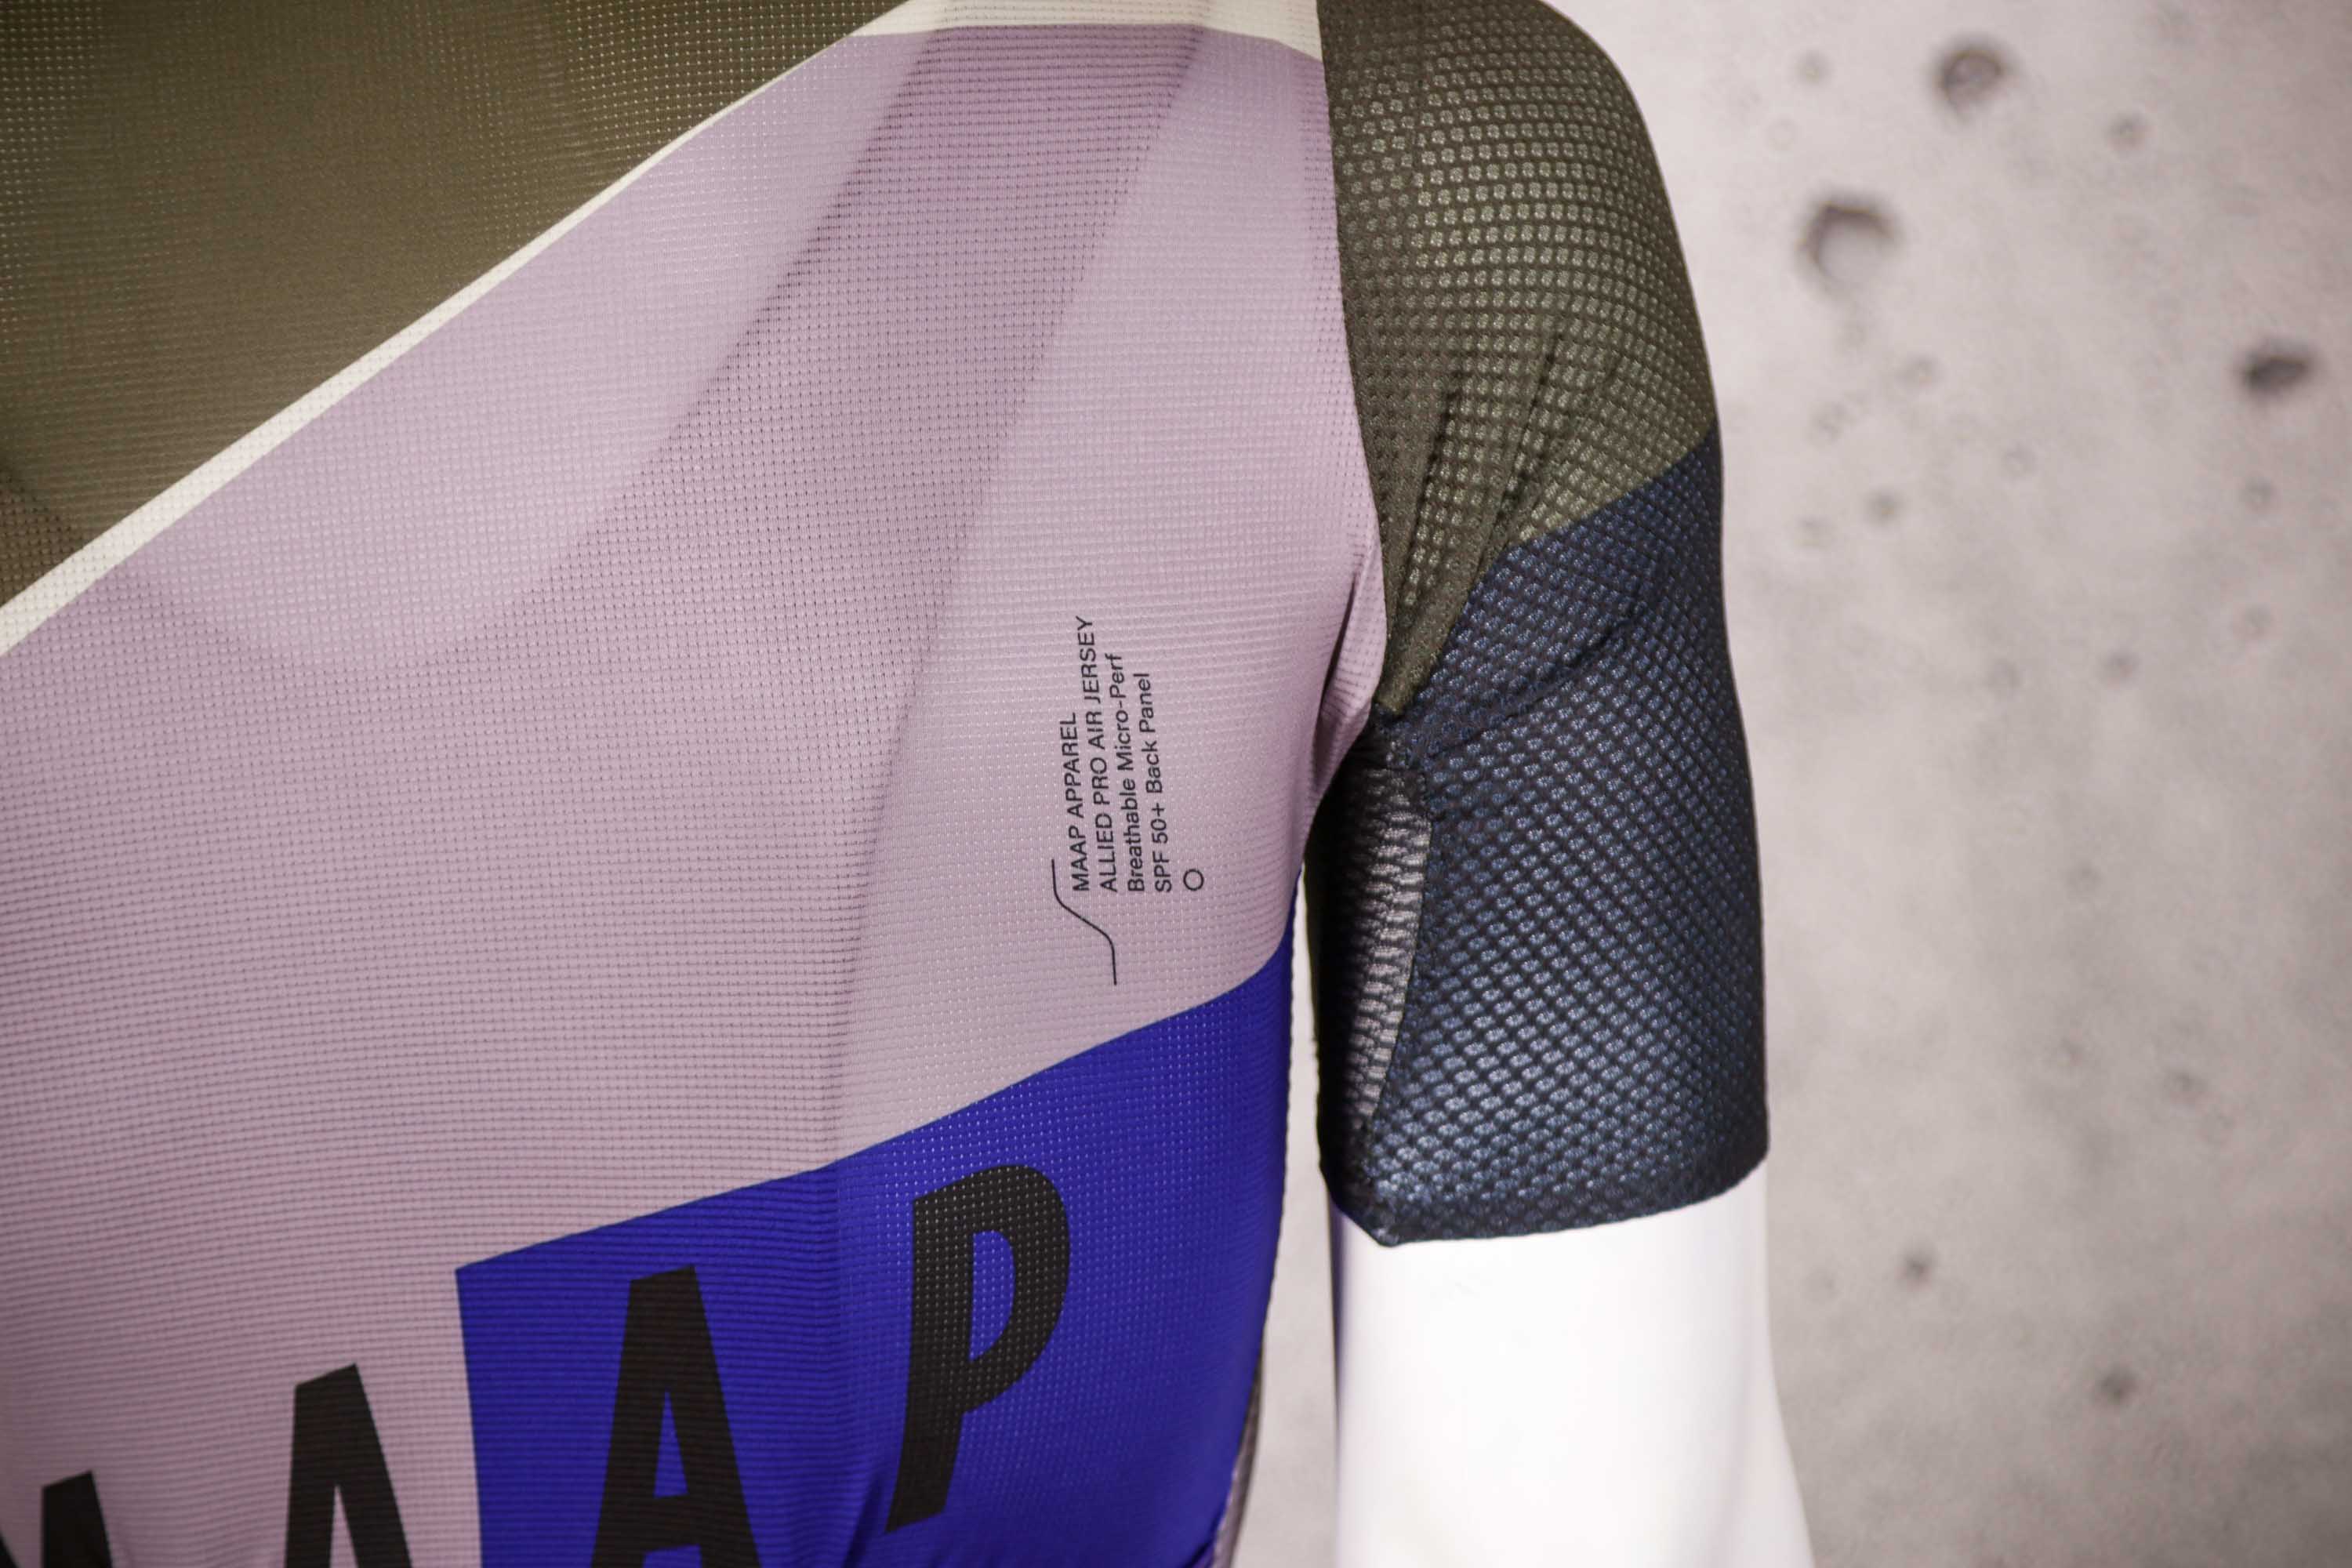 Review: MAAP Allied Pro Air Jersey | road.cc